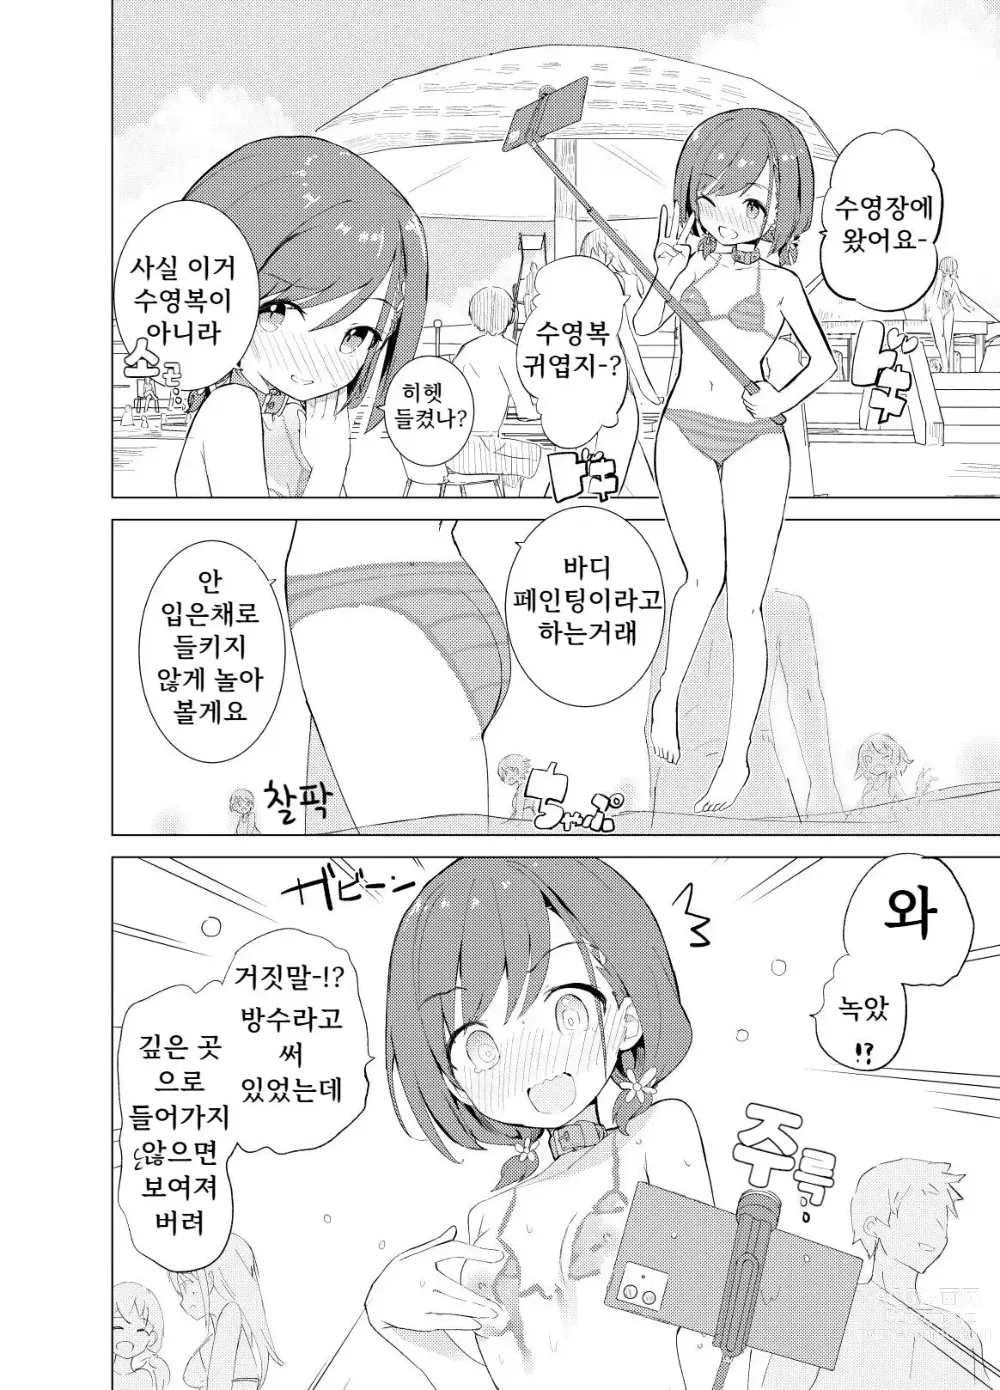 Page 5 of doujinshi S.S.S.Di part 1